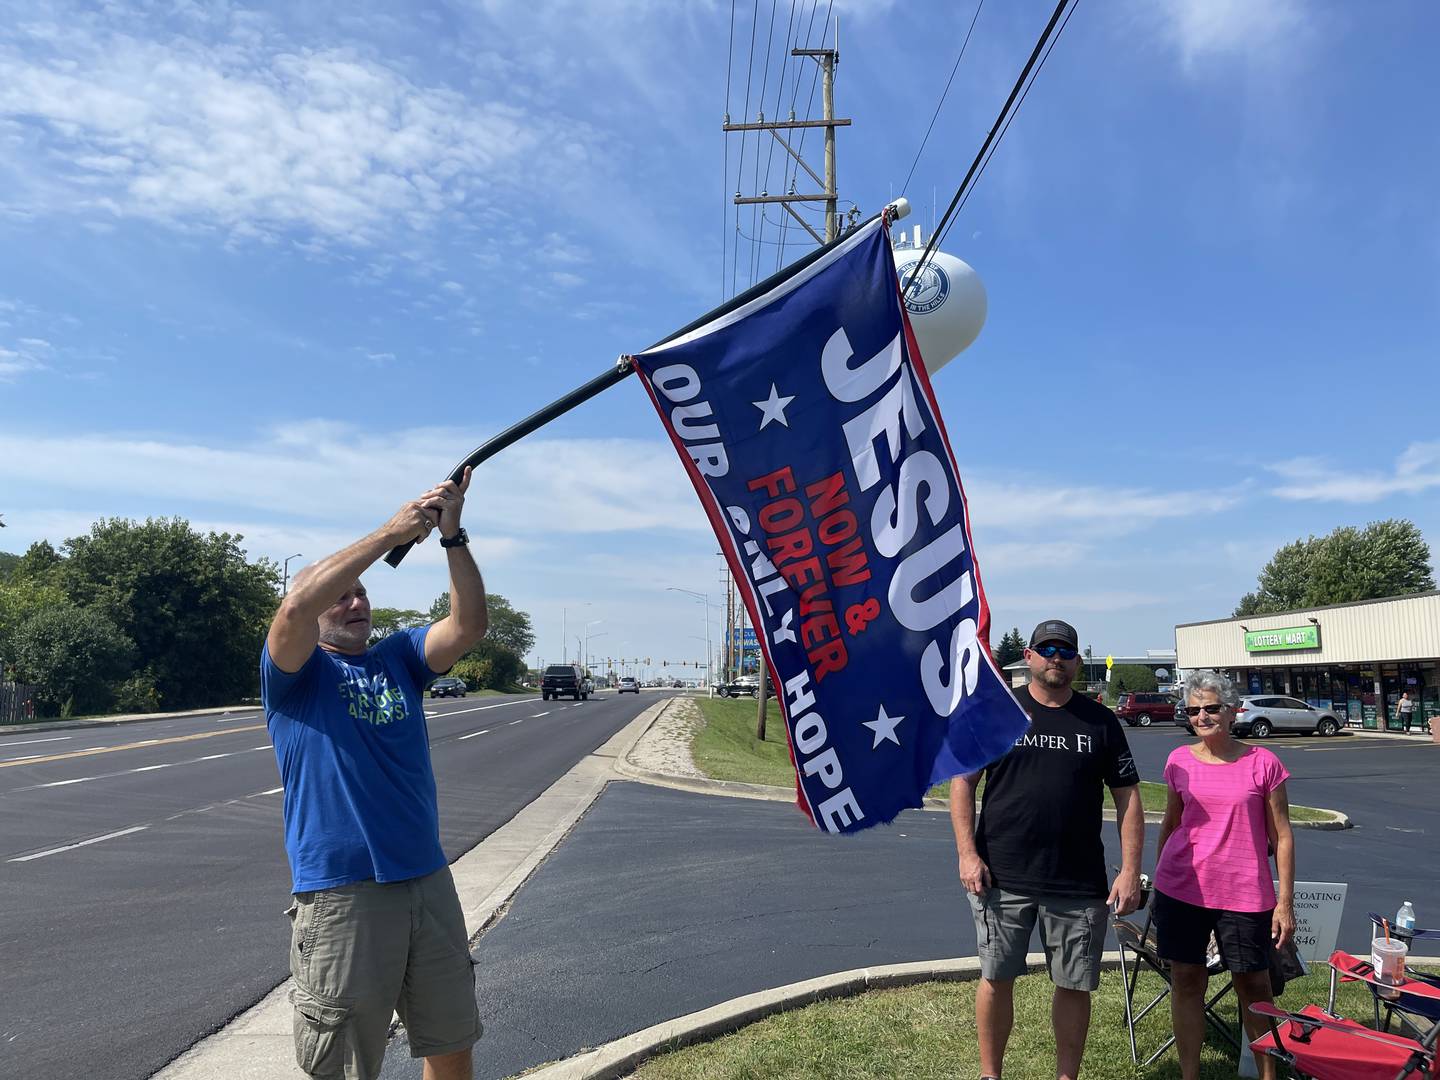 James Gustafson waves a flag that says "Jesus Our Only Hope" outside of UpRising Bakery in Lake in the Hills on Saturday, Sept. 17, 2022.